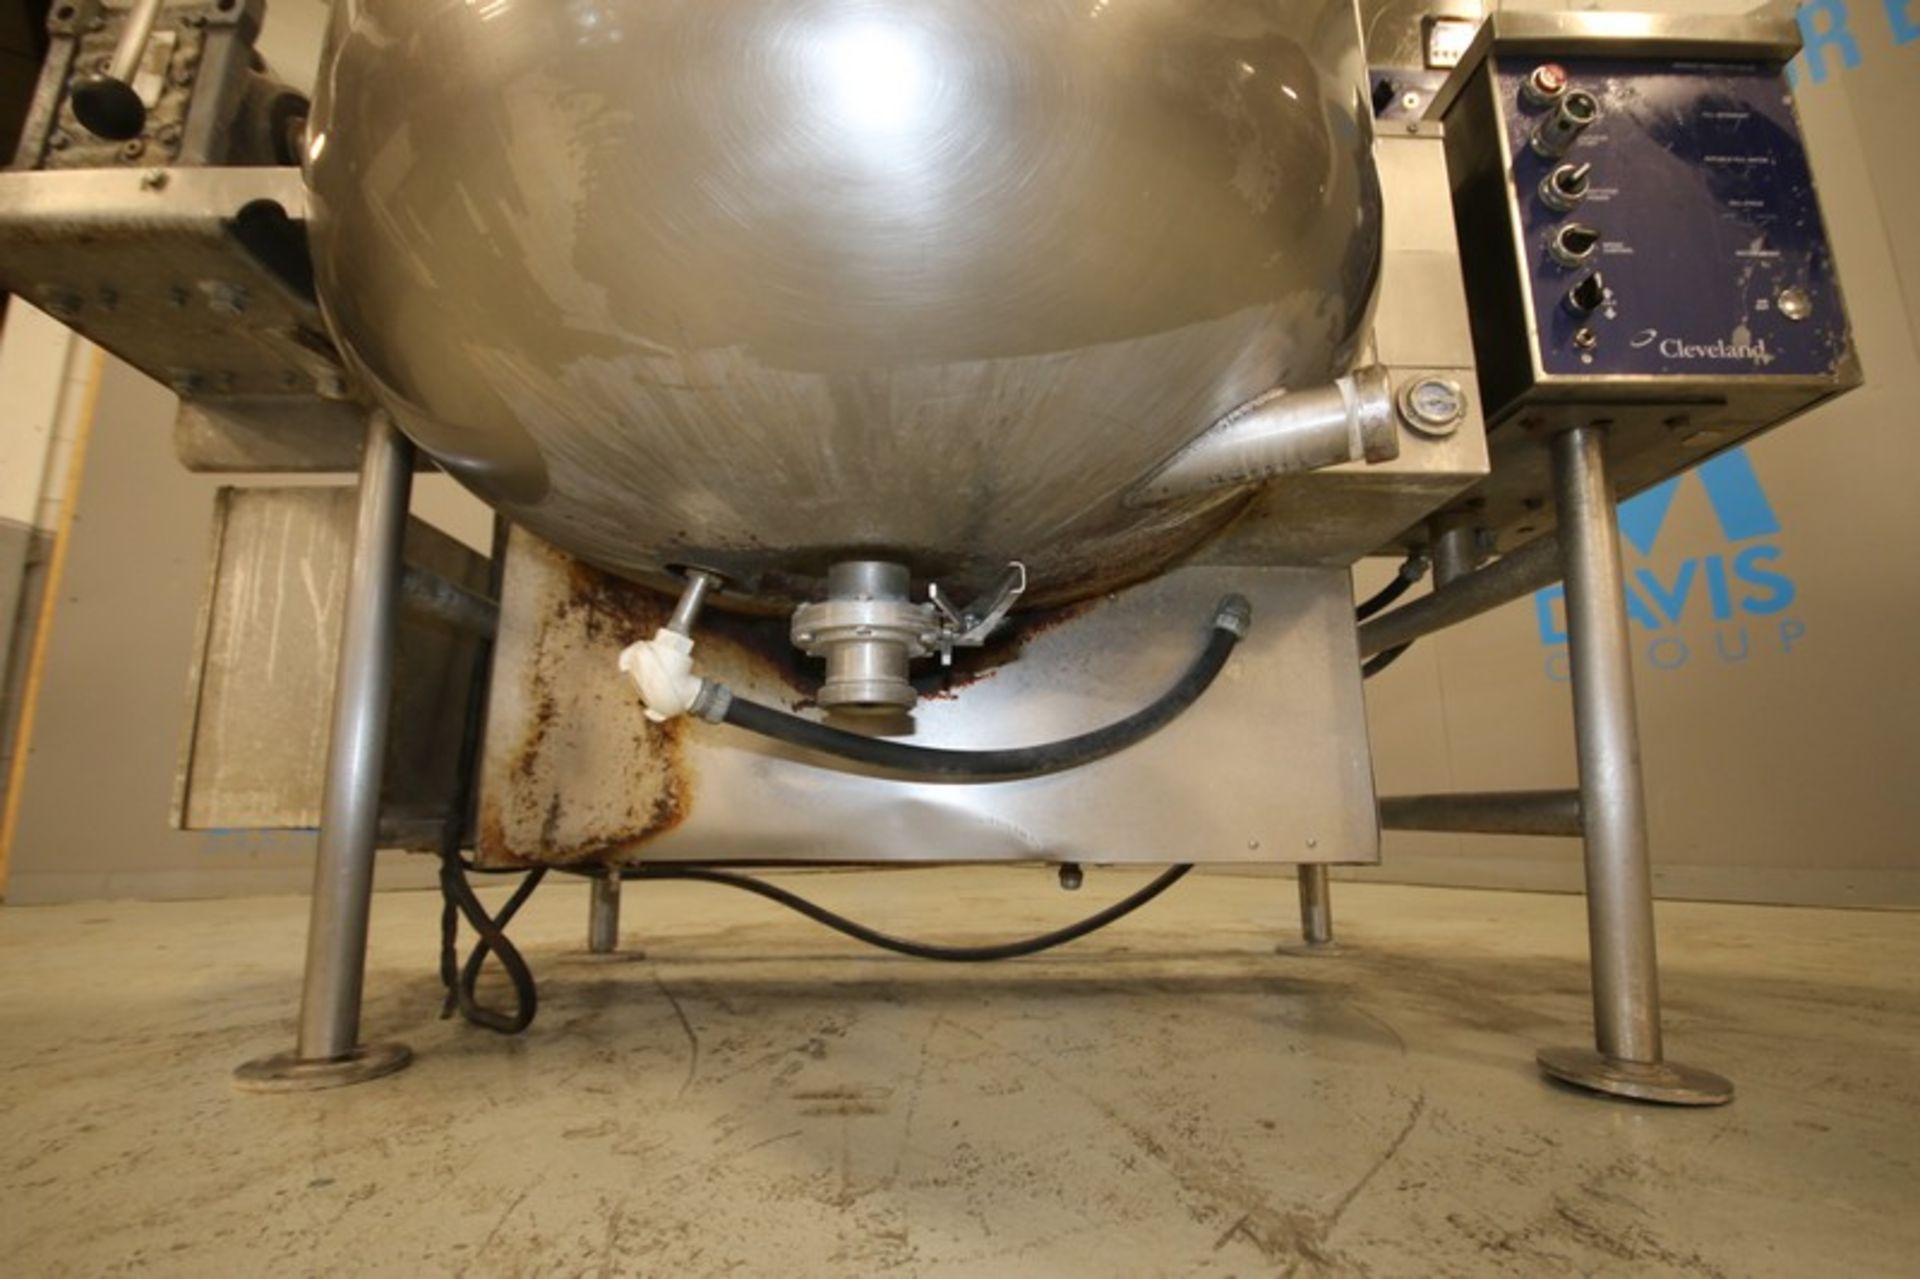 2006 Cleveland 100 Gallon, Jacketed S/S Tilting Kettle, Model HAMKGL100T, SN 3026-06B-01, with - Image 8 of 10